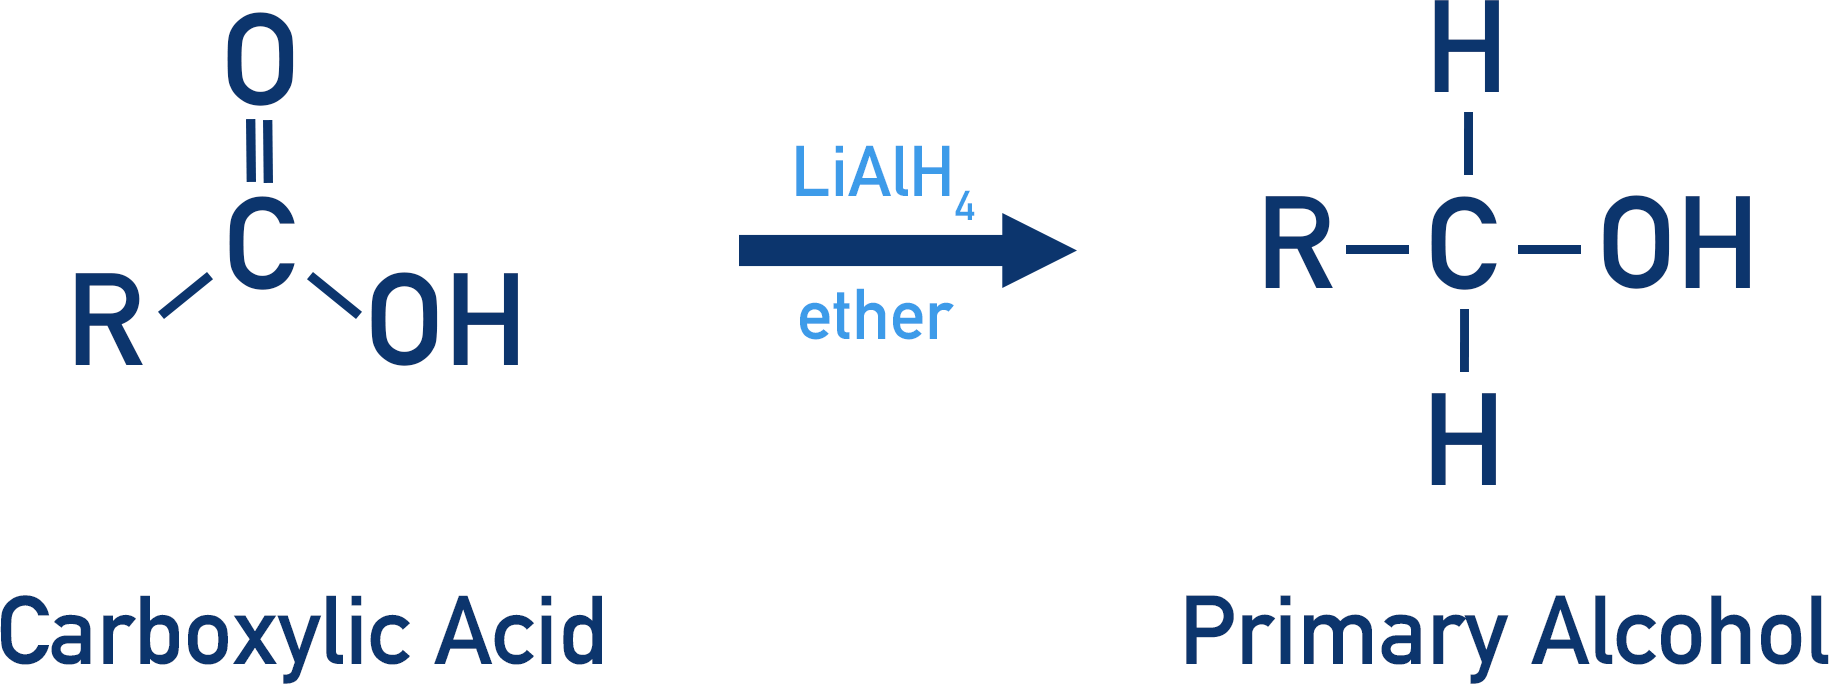 reduction of carboxylic acid to primary alcohol LiAlH4 ether